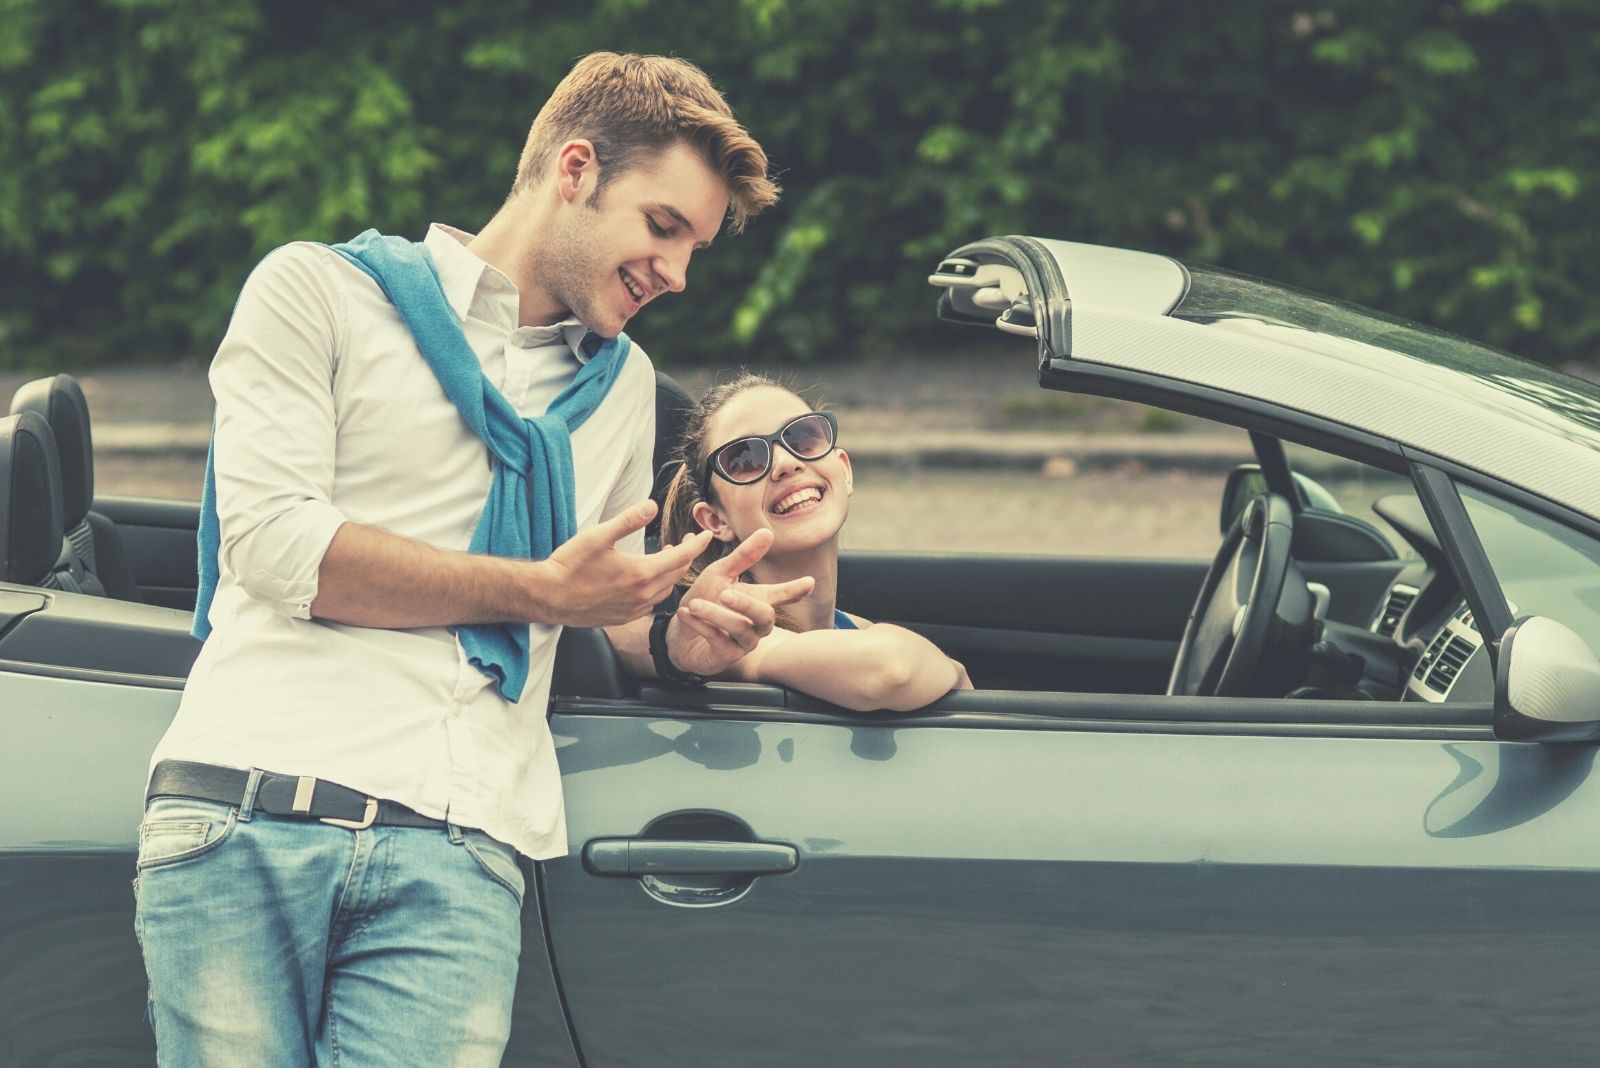 cheerful couple talking outdoors with woman sitting on the car and the man leaning on the topdown's door